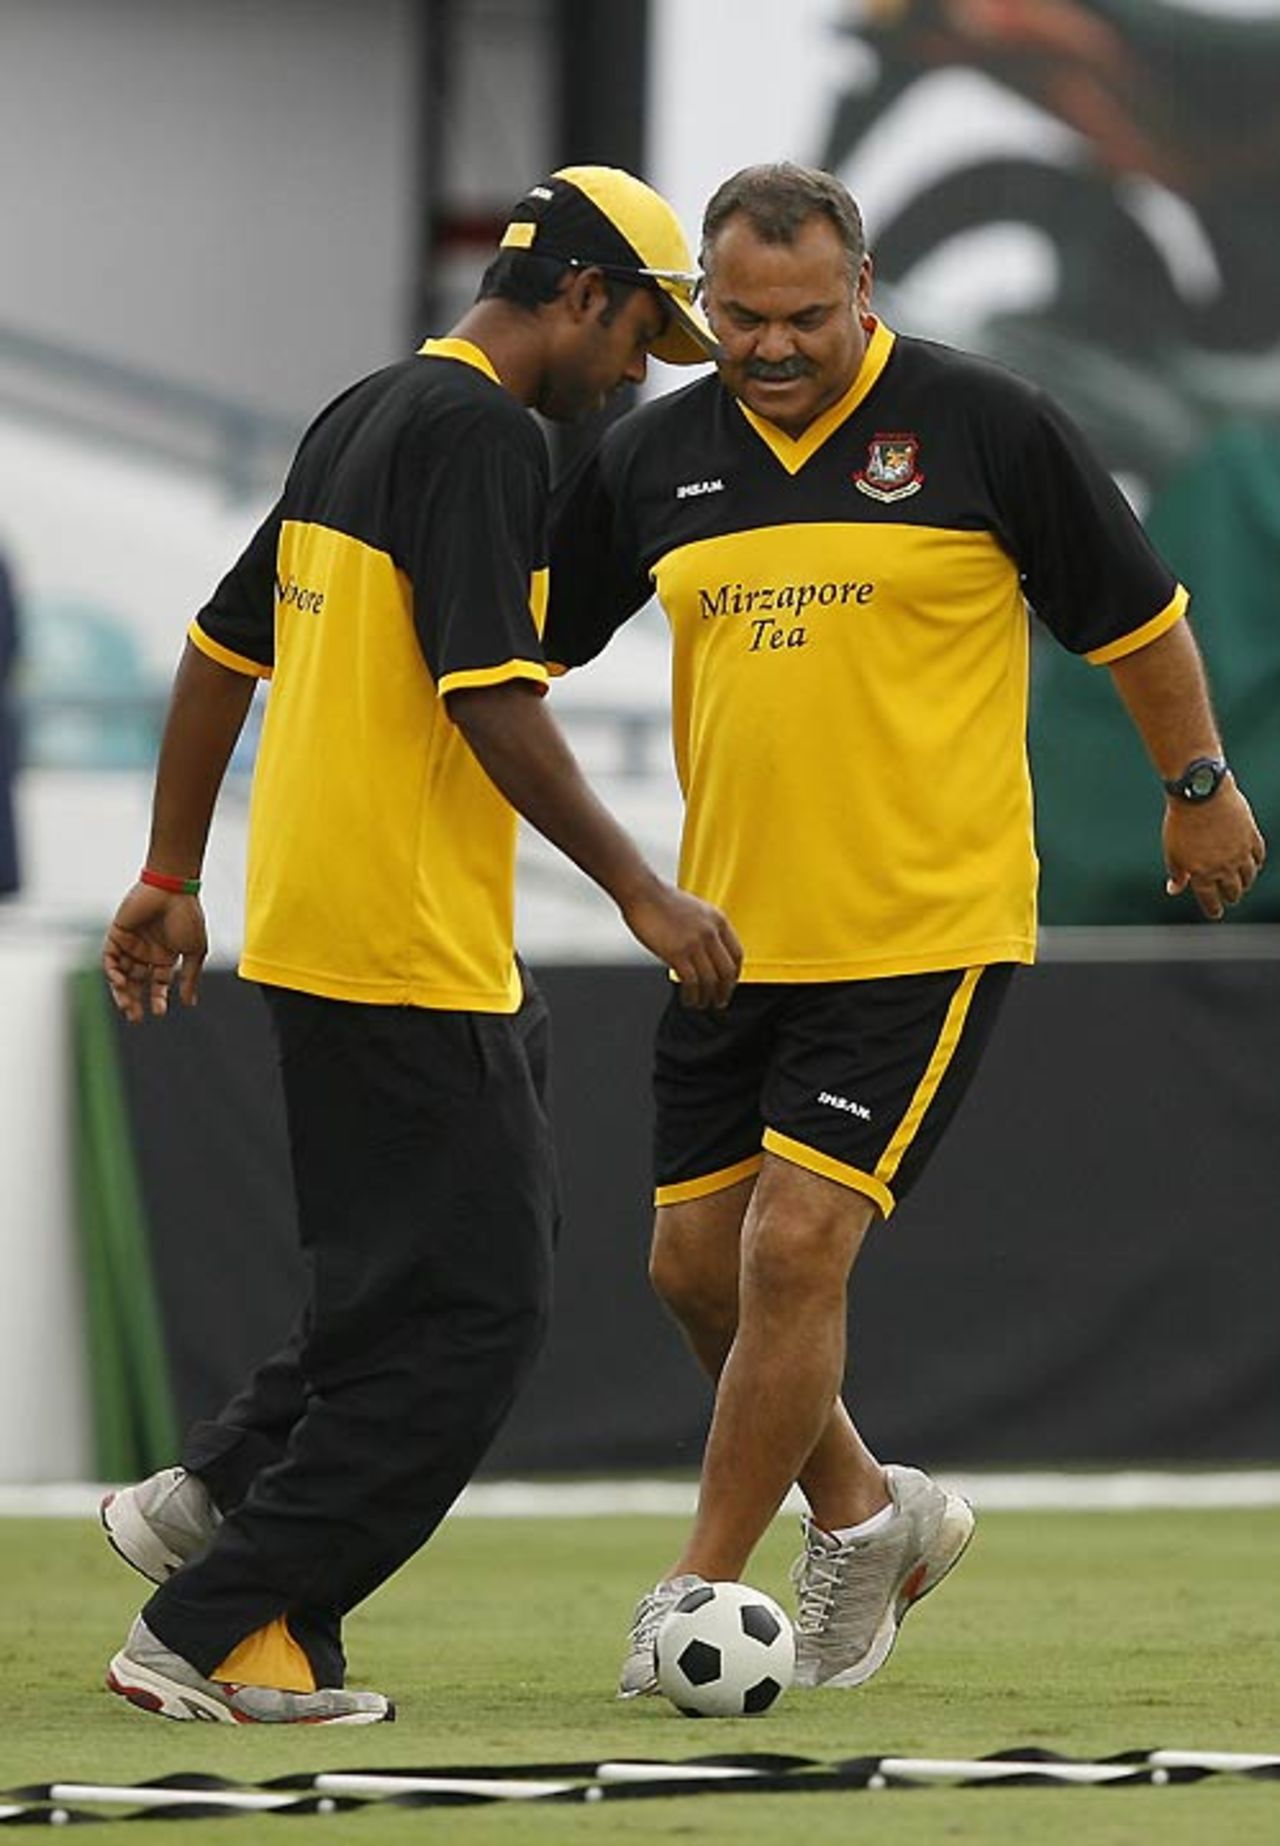 Dav Whatmore and Syed Rasel play soccer during a training session at the Kensington Oval, Barbados, April 14, 2007 